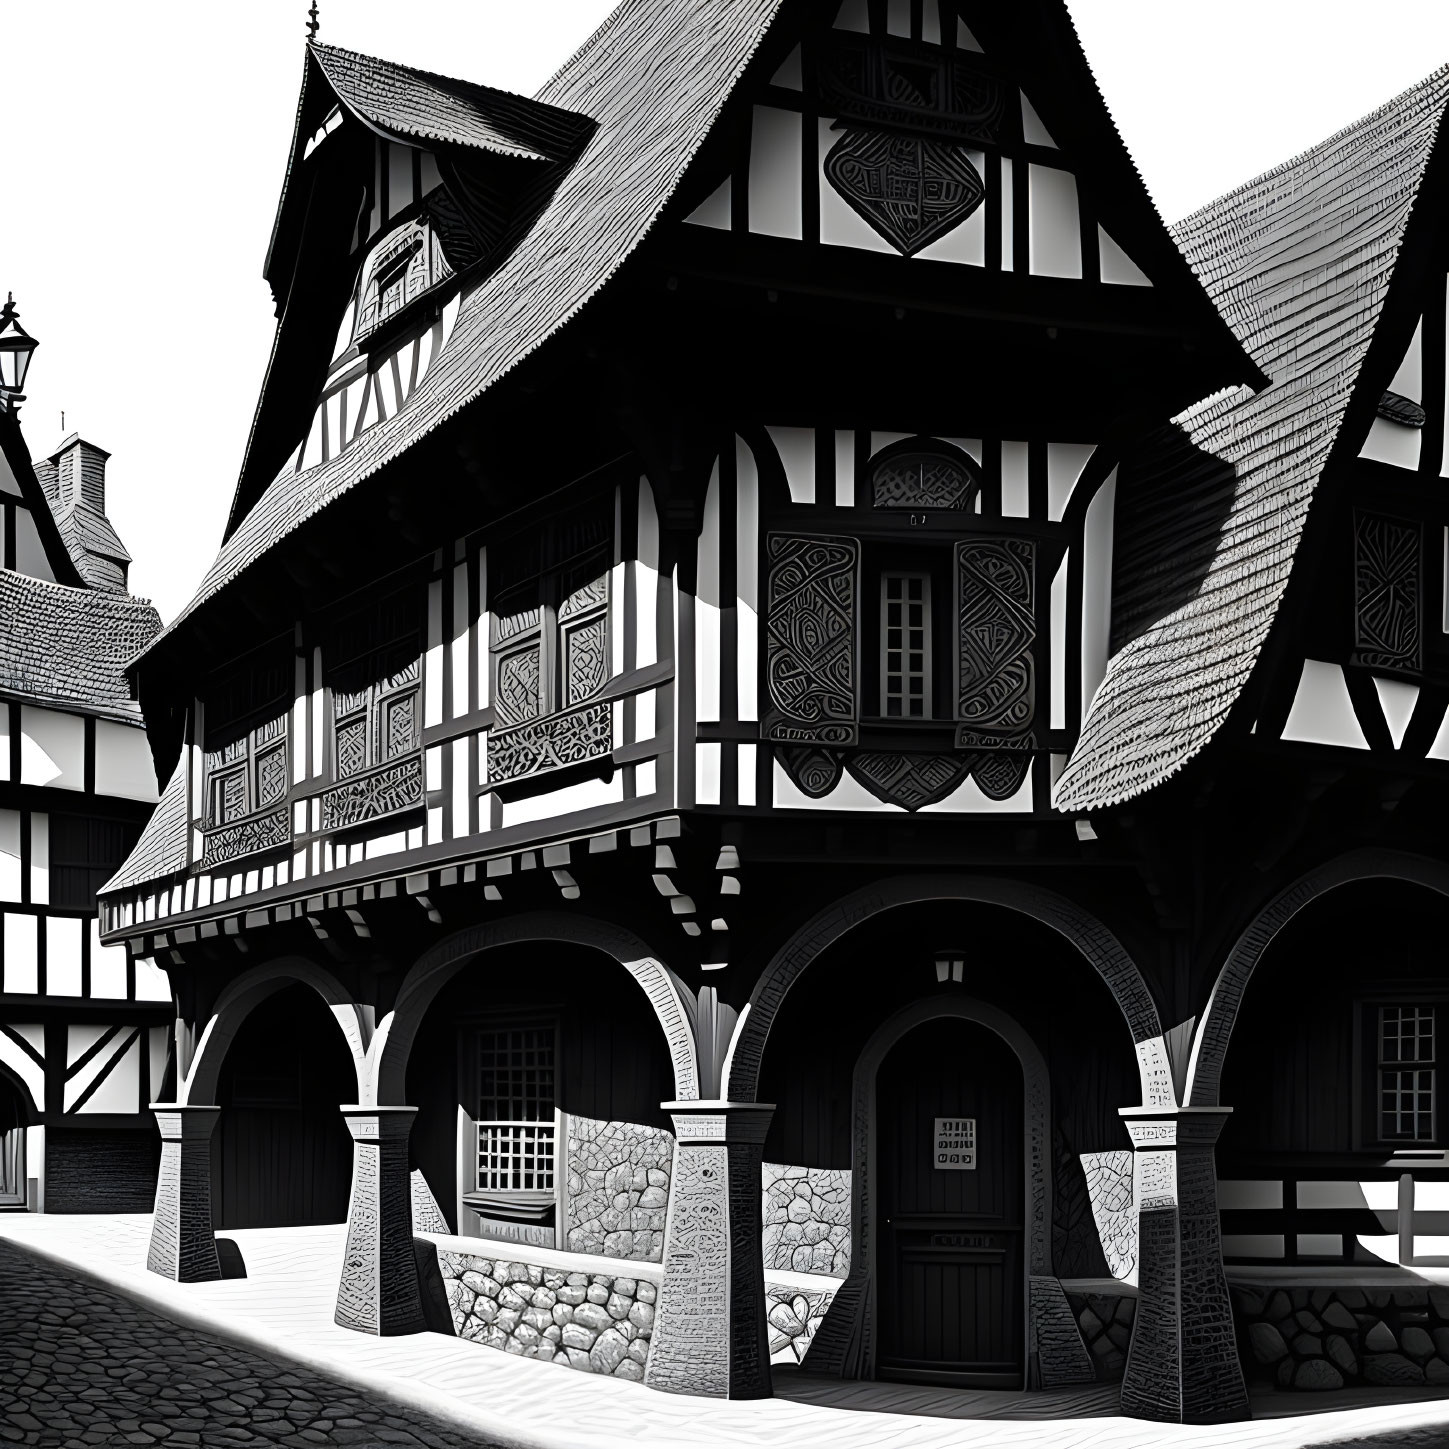 Traditional half-timbered house illustration with ornate patterns and cobblestone street